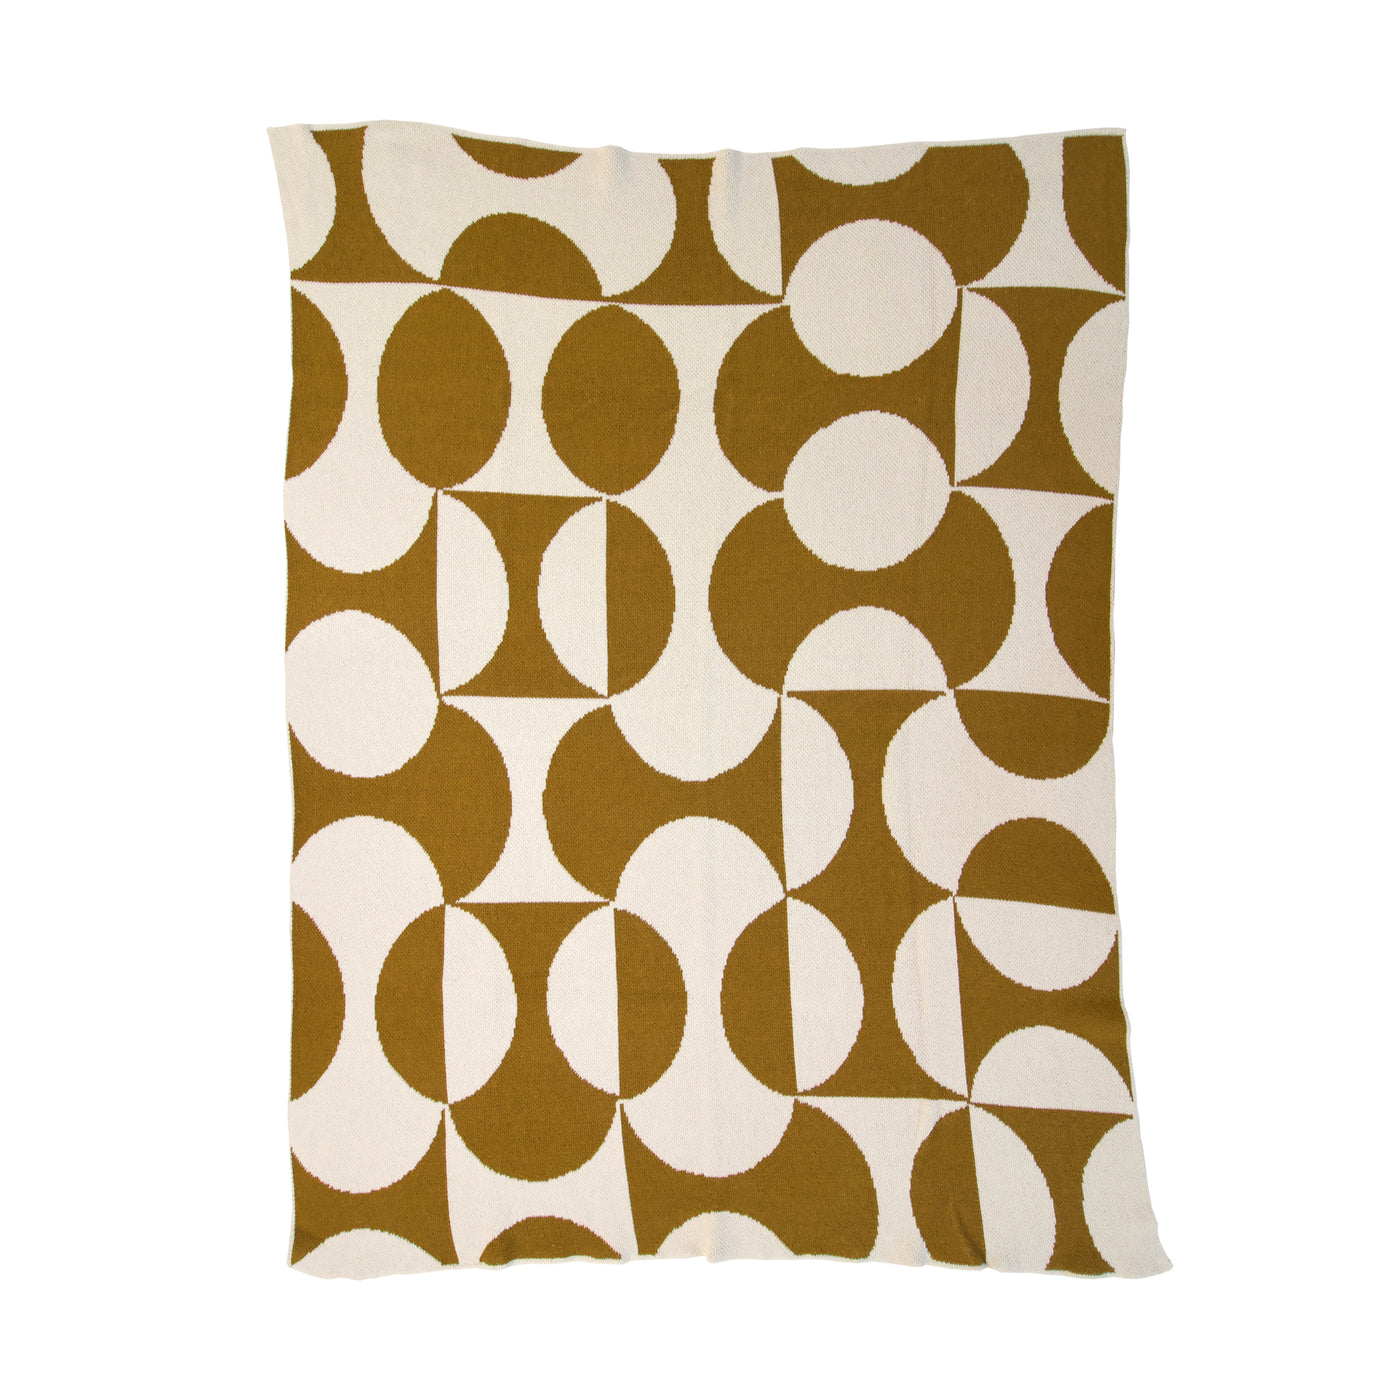 Puzzle Throw in Ochre